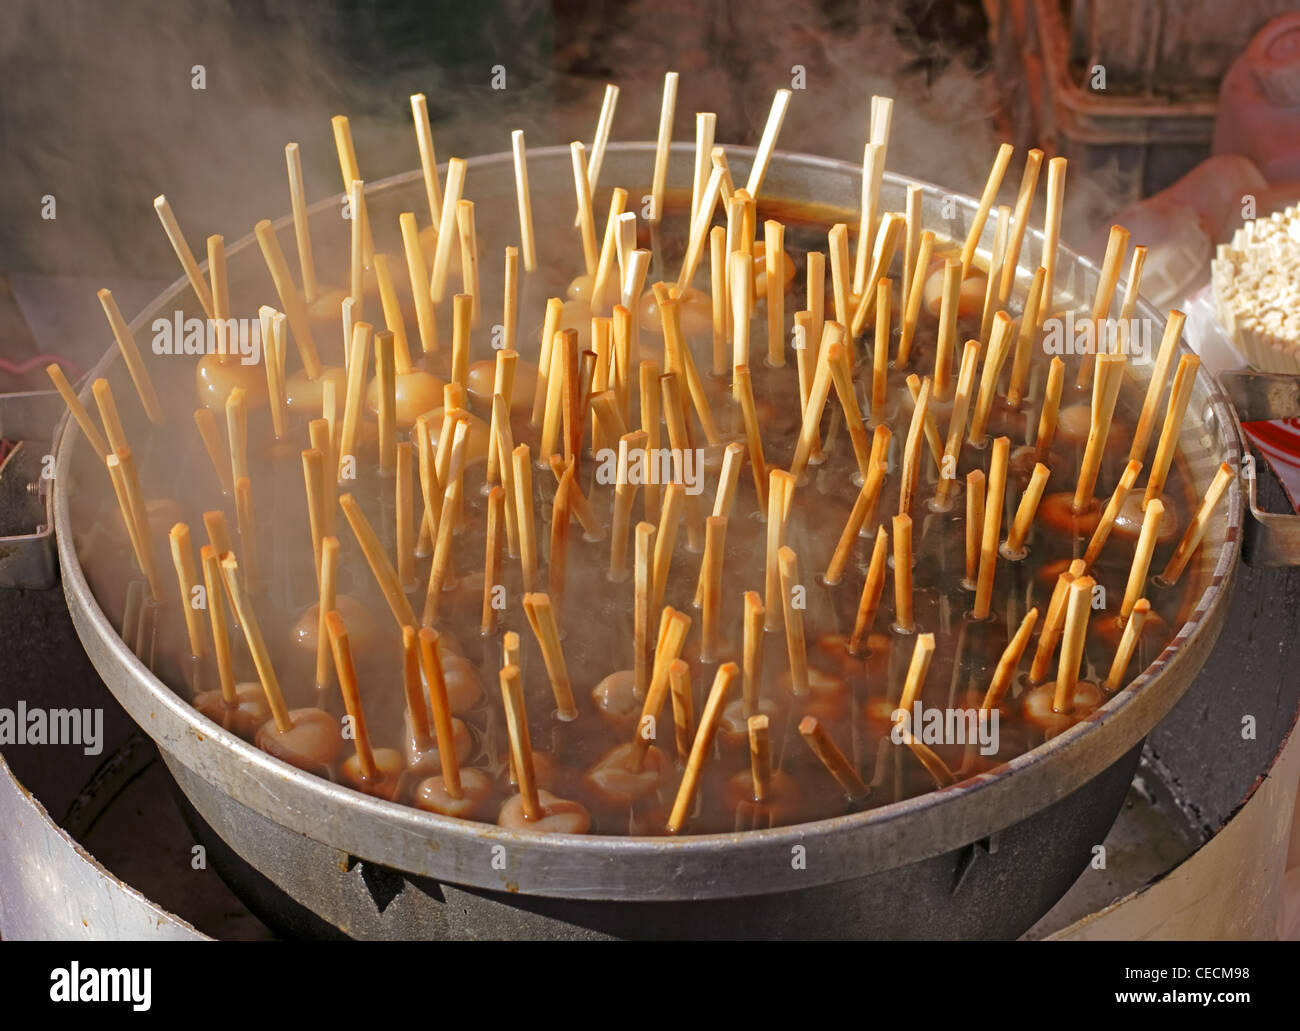 Image of a big bowl with Japanese rice balls boiling-specific Japanese street festival food. Stock Photo